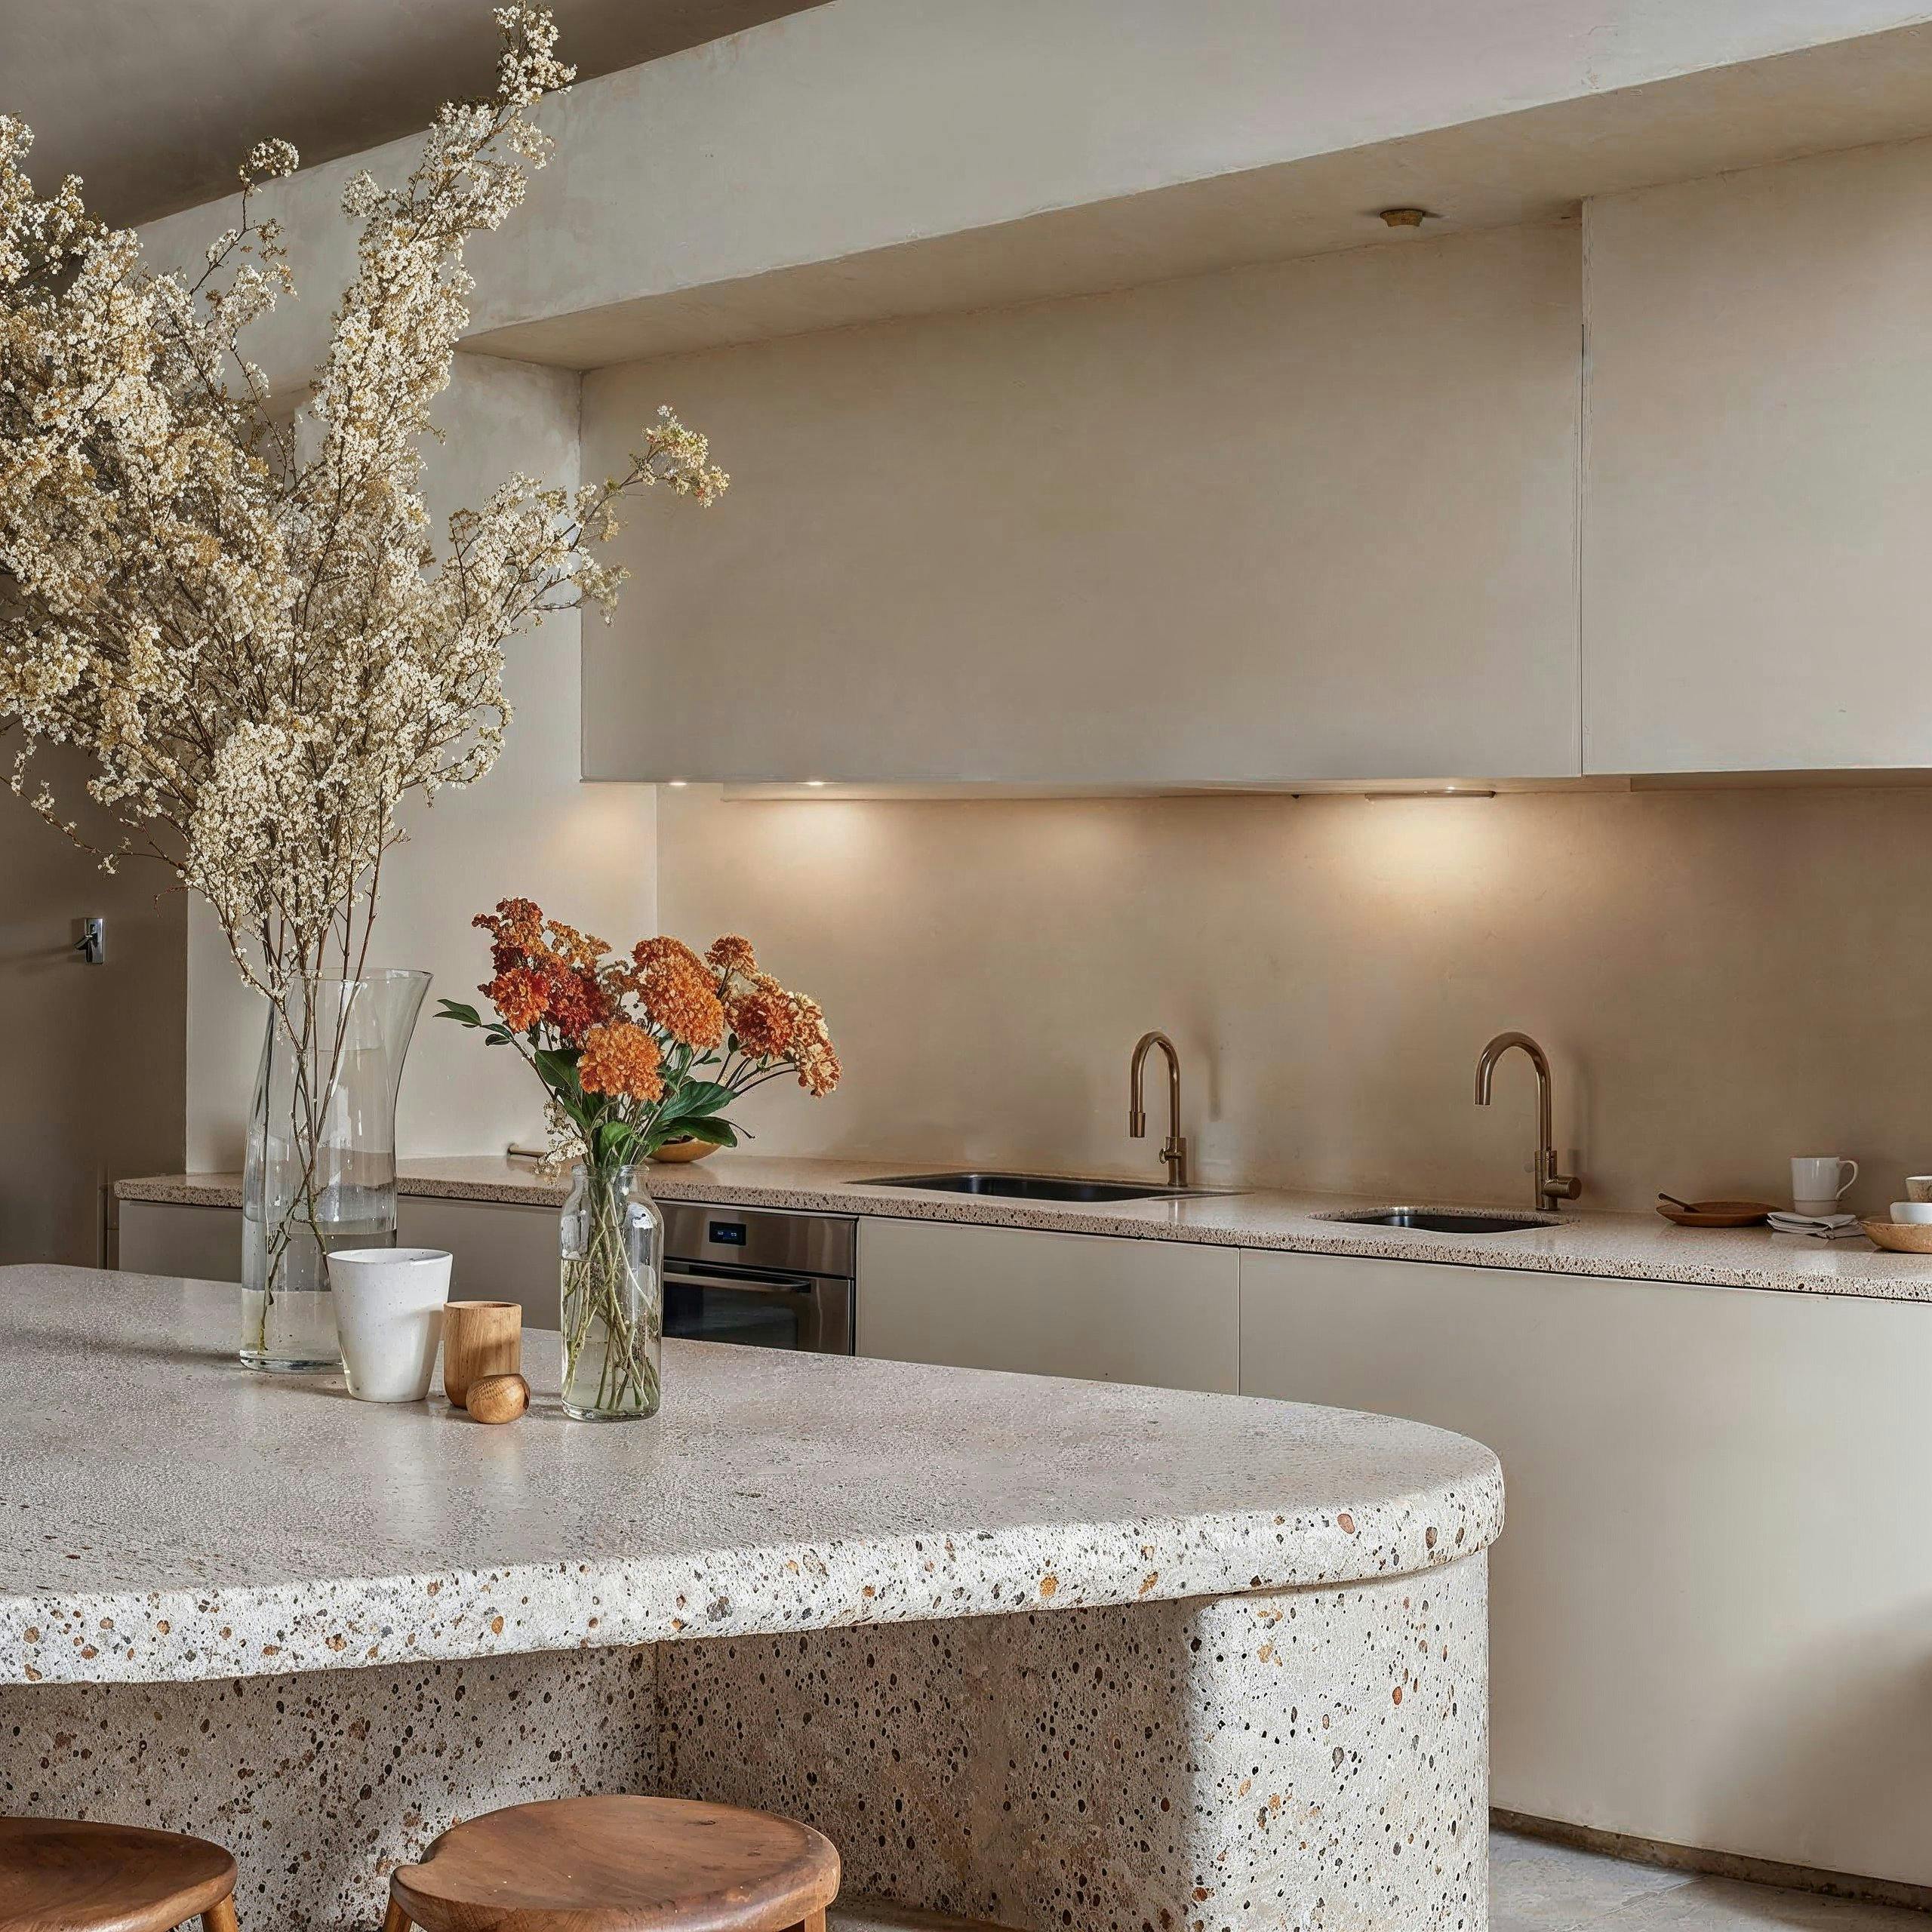 What if we imagine a scene with a kitchen that is the epitome of modern and organic design?